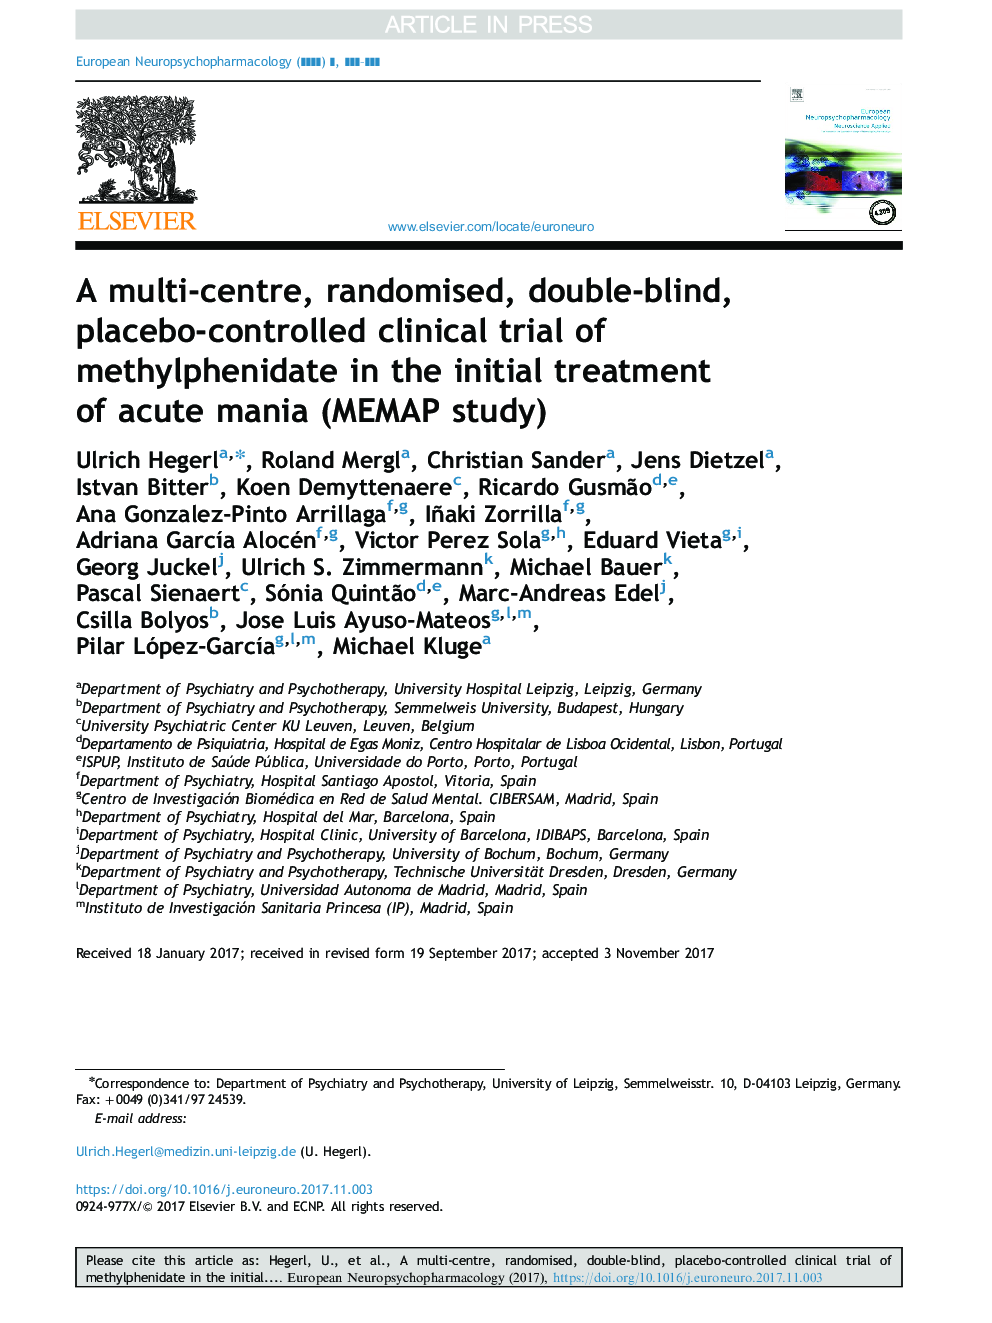 A multi-centre, randomised, double-blind, placebo-controlled clinical trial of methylphenidate in the initial treatment of acute mania (MEMAP study)